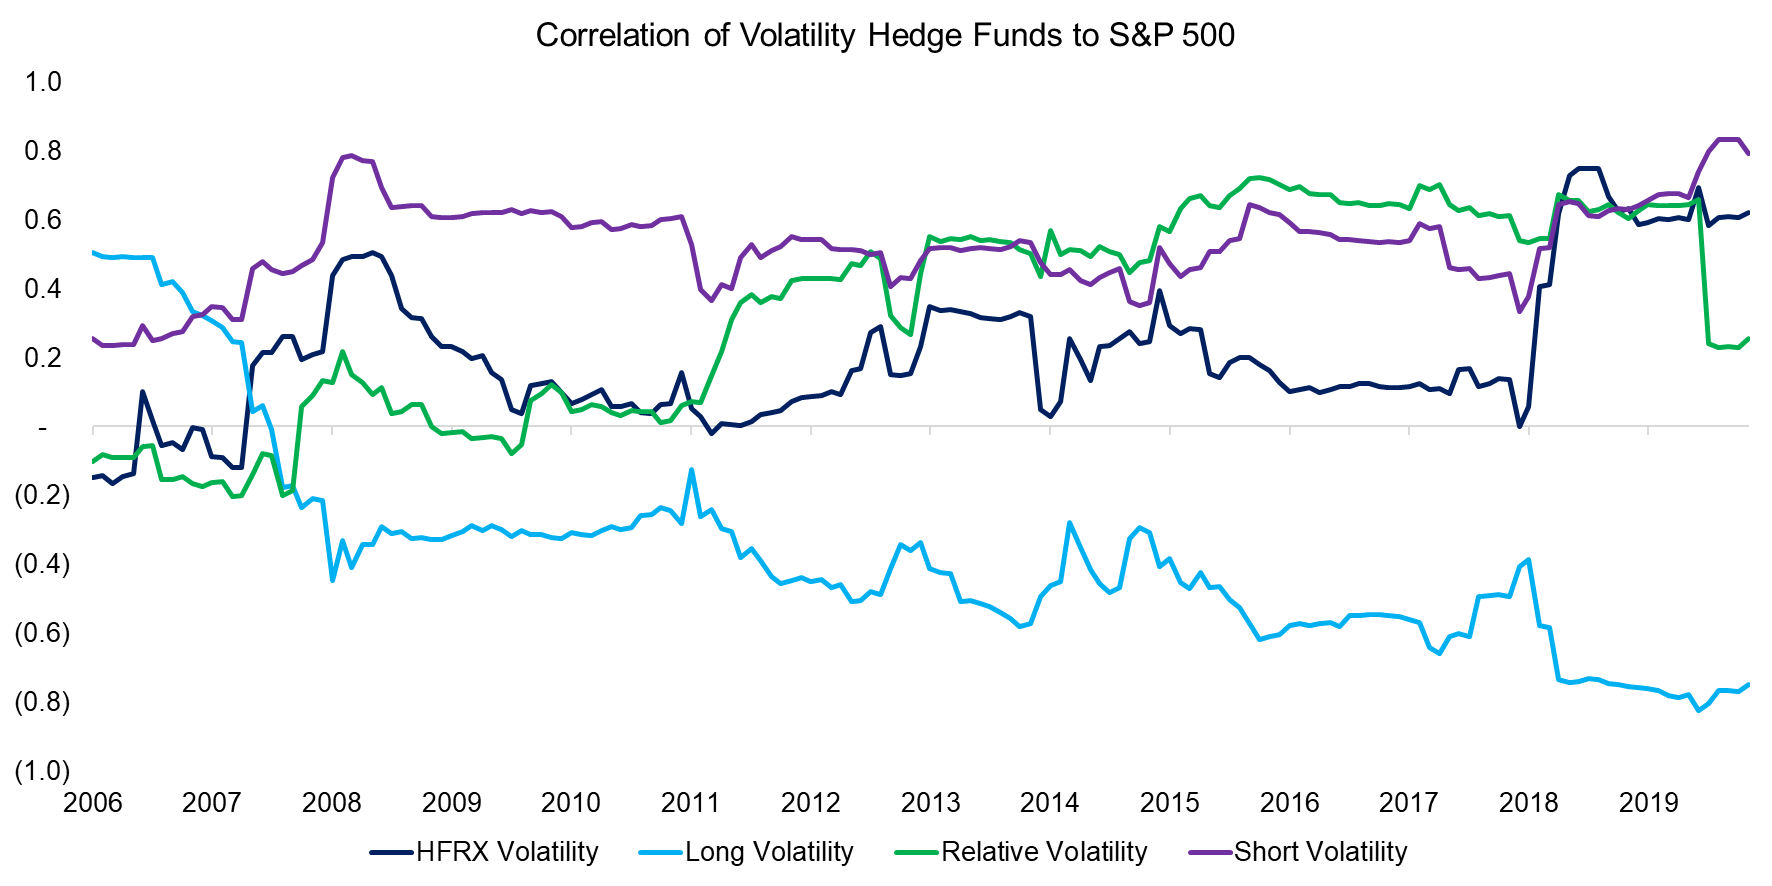 Correlation of Volatility Hedge Funds to S&P 500